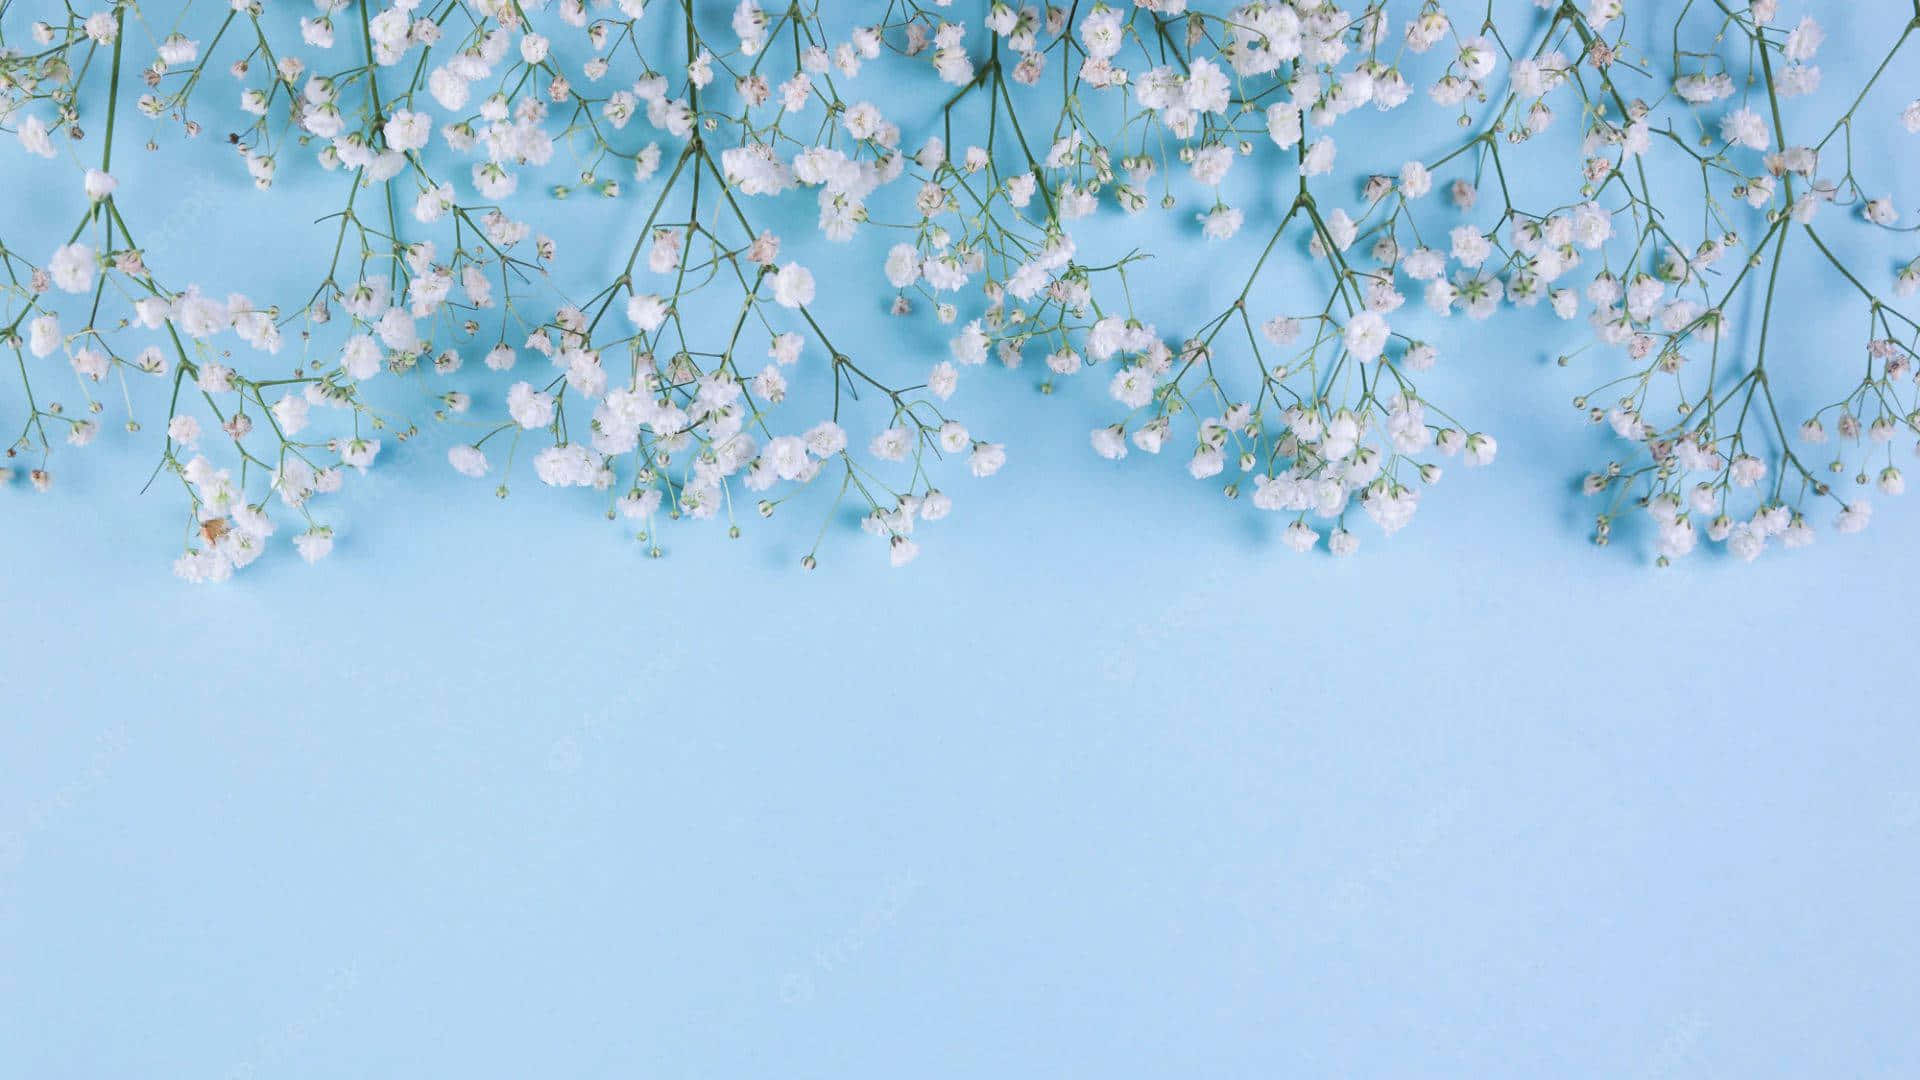 Light Blue Aesthetic Pictures Wallpaper